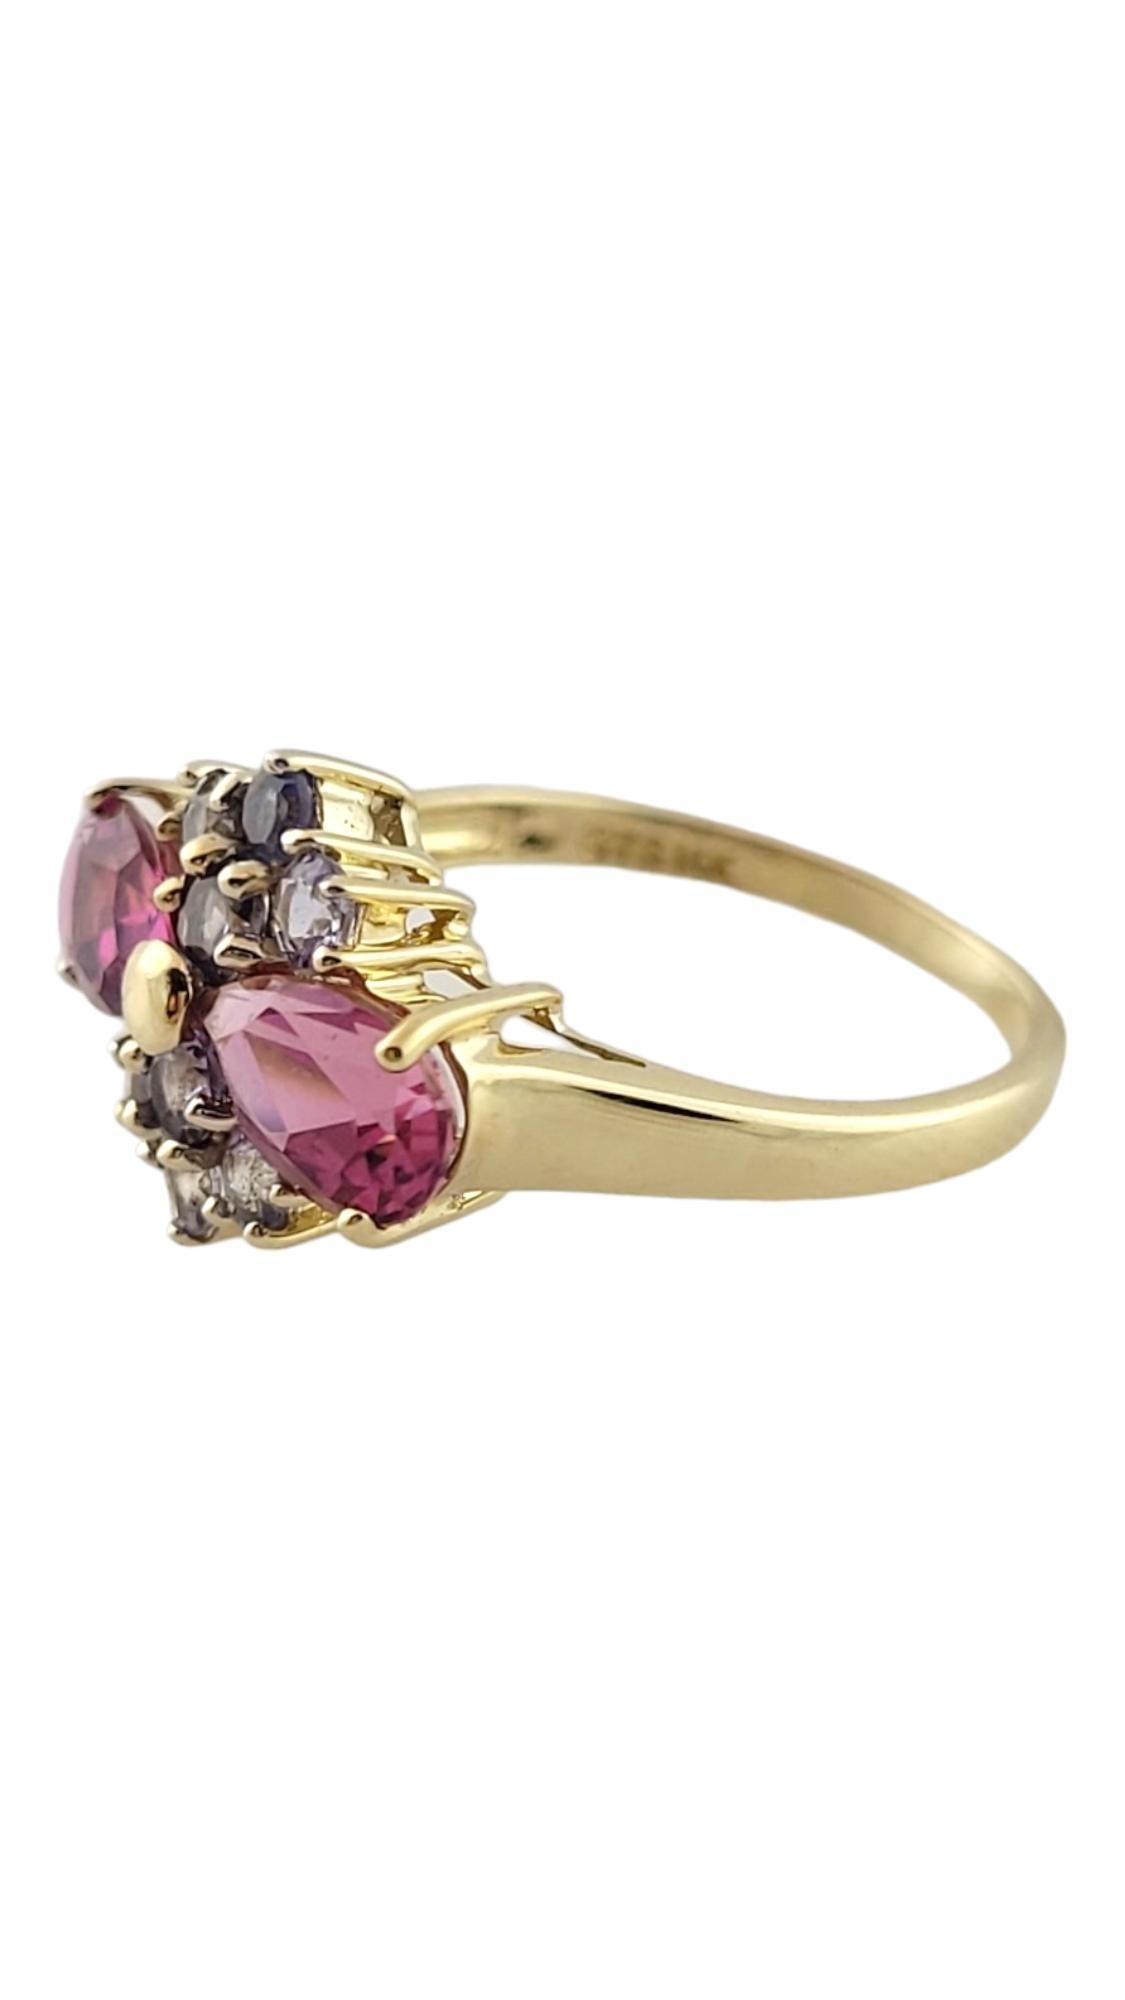 Vintage 14K Yellow Gold Pink Tourmaline and Tanzanite Ring Size 7

This beautiful 14K gold ring features 2 gorgeous pink tourmaline stones with 6 sparkling tanzanite stones!

Ring size: 7
Shank: 1.80mm
Front: 12.3mm X 16.7mm X 6.27mm

Weight: 2.0